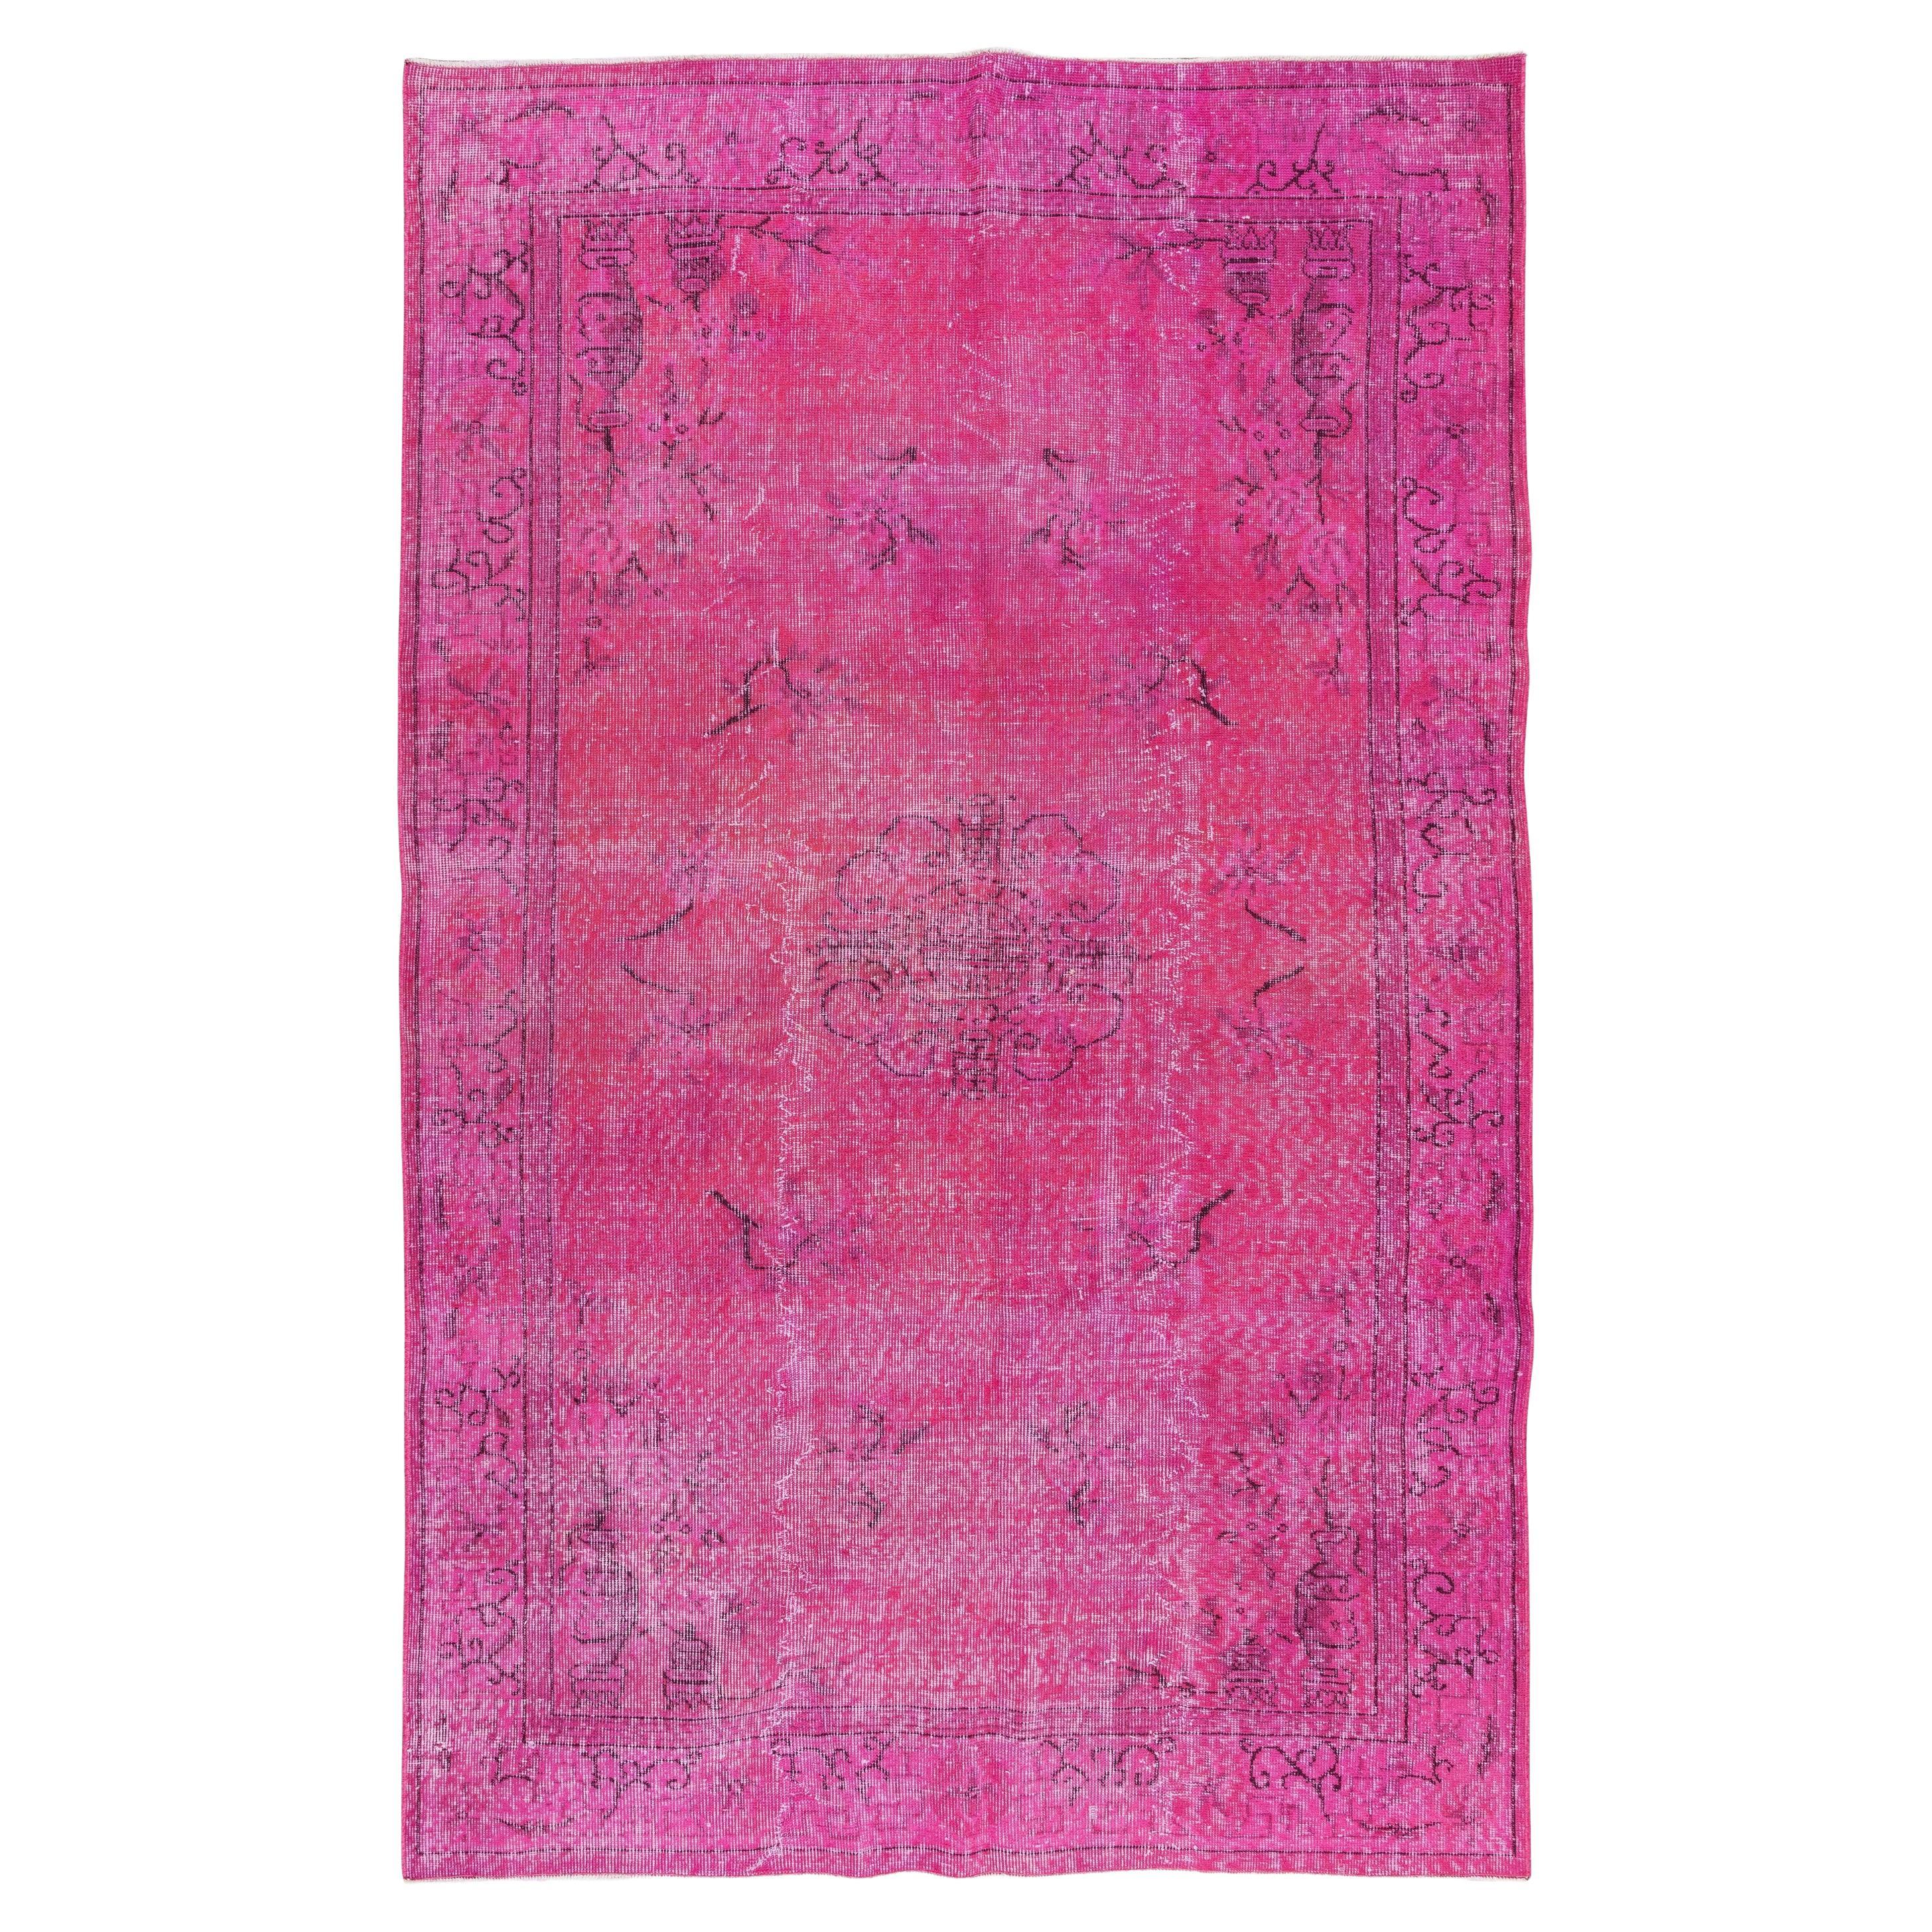 5.4x8.7 Ft Handmade Mid-Century Rug in Fuchsia Pink with Art Deco Chinese Design For Sale